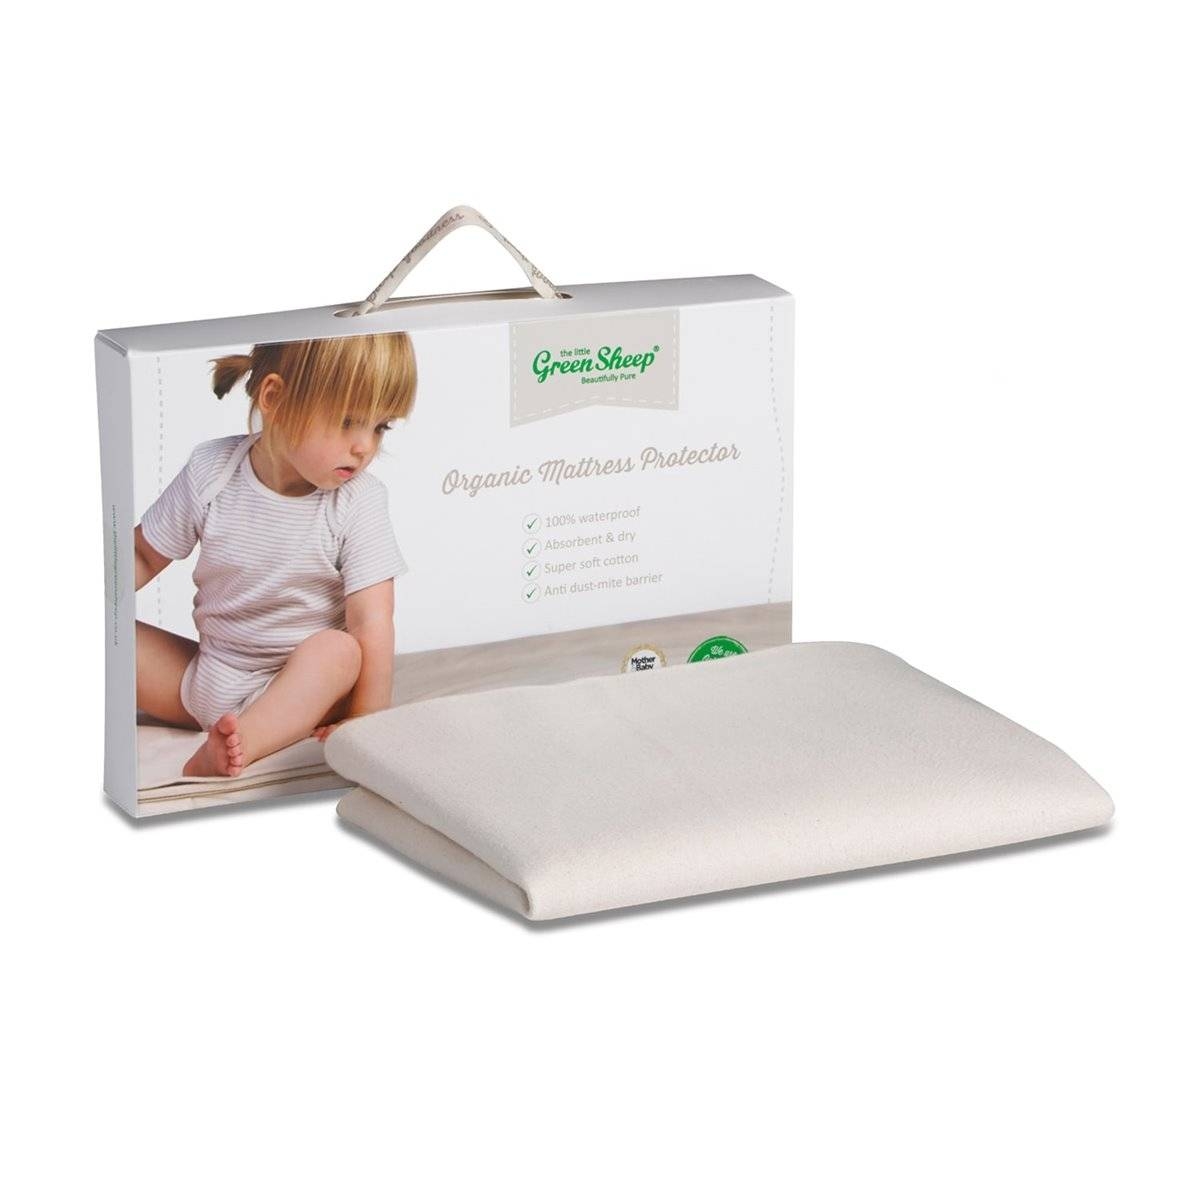 The Little Green Sheep Waterproof Moses Basket / Carrycot Mattress Protector